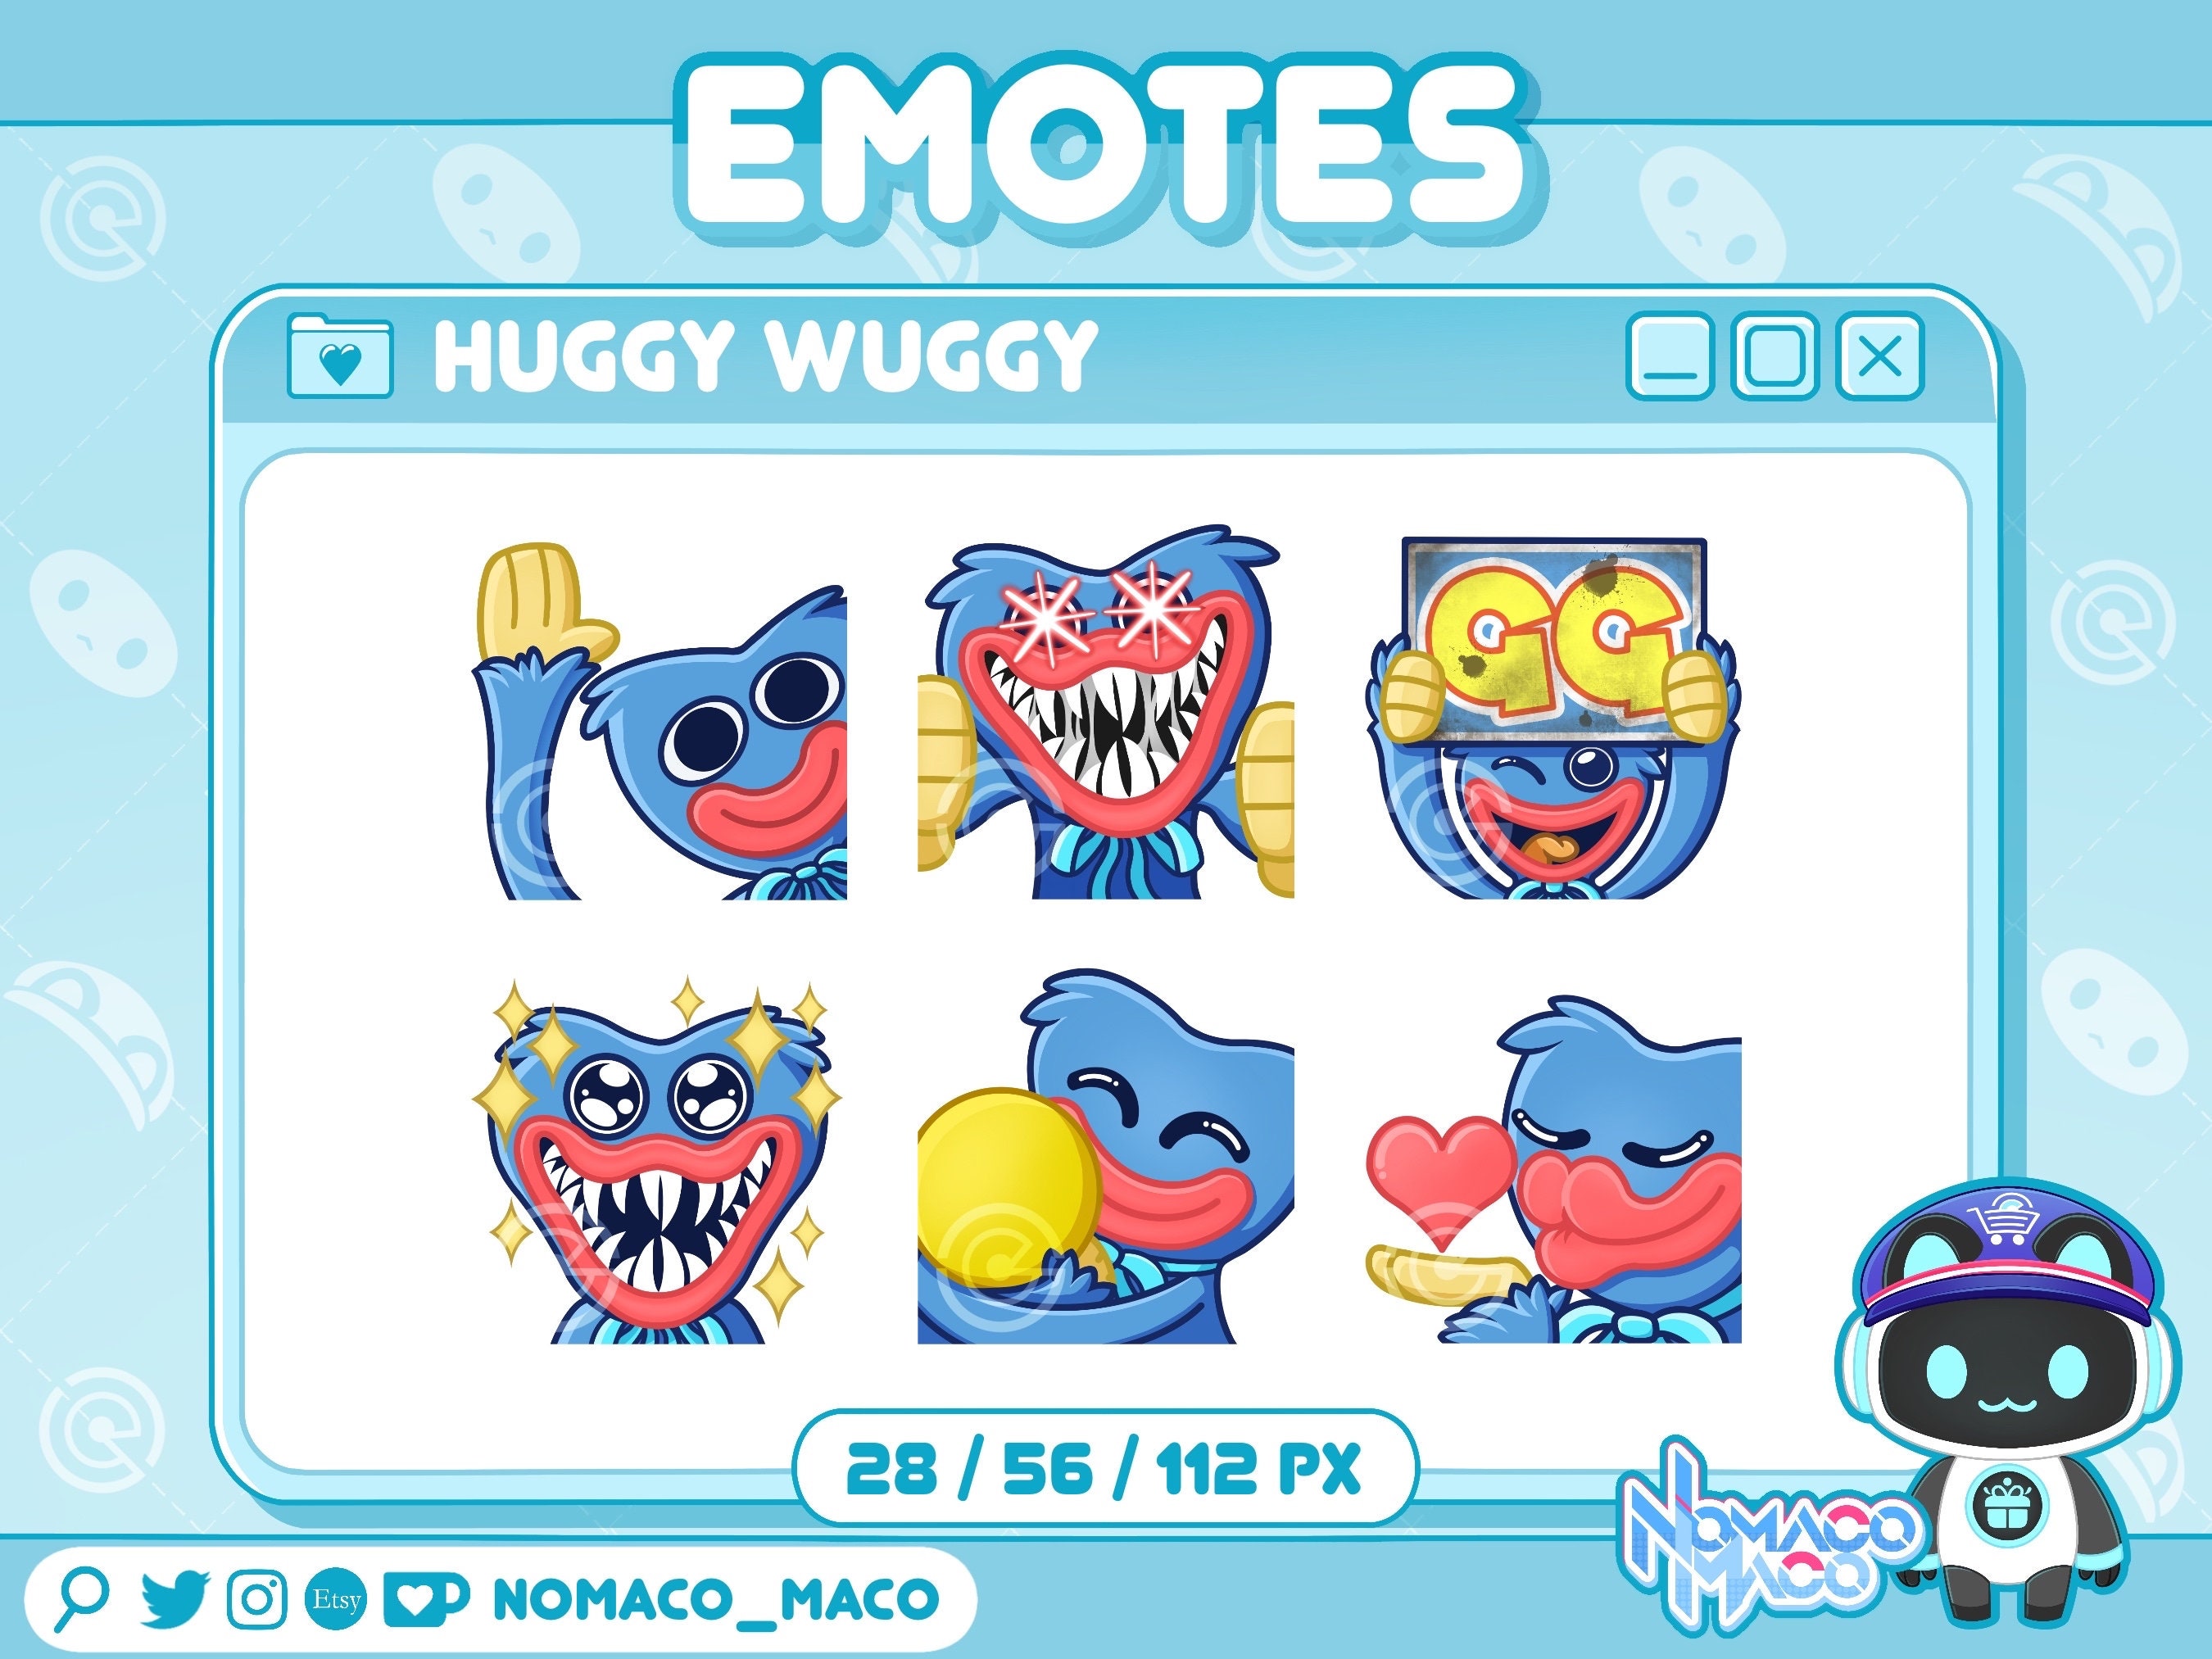 Poppy Playtime / Project Playtime Huggy Wuggy SET of 6 EMOTES 